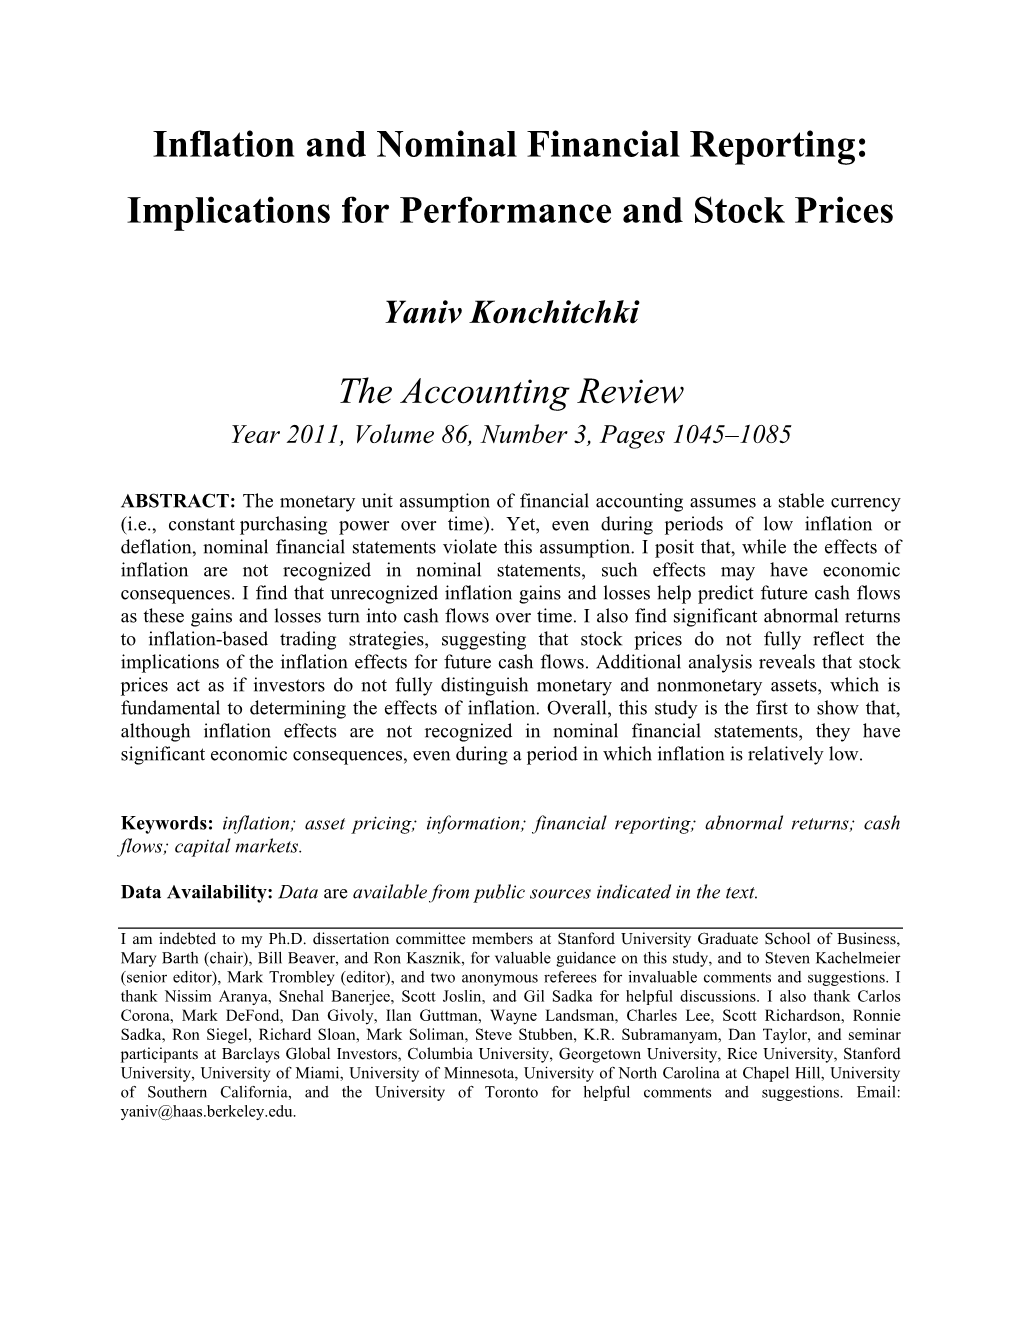 Inflation and Nominal Financial Reporting: Implications for Performance and Stock Prices